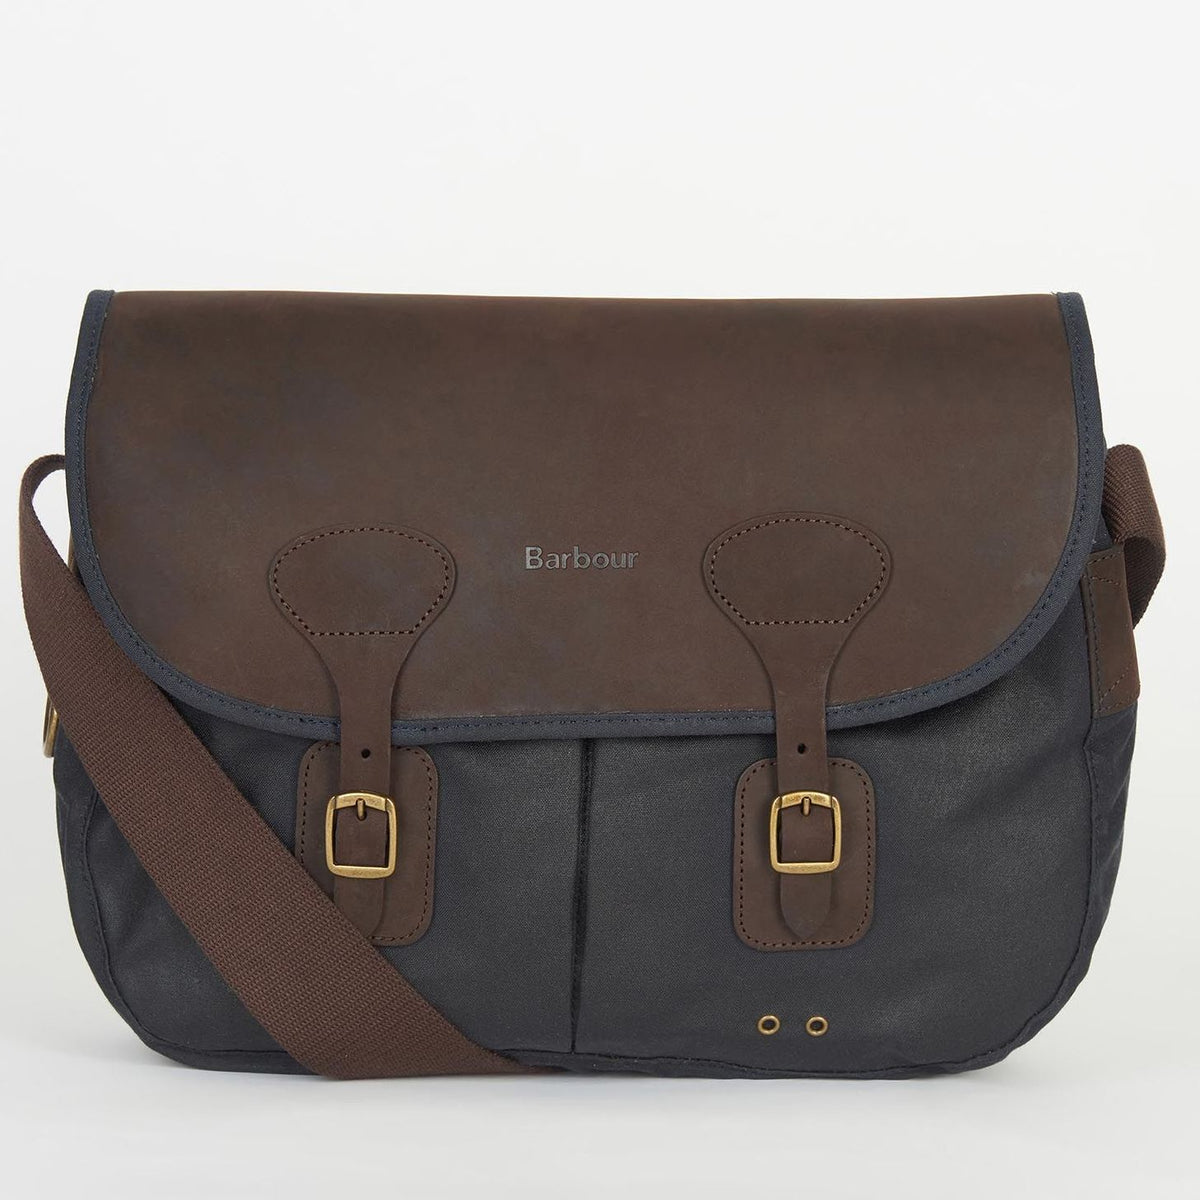 Barbour Tarras wax leather bag in Navy UBA0003NY911 – Smyths Country Sports